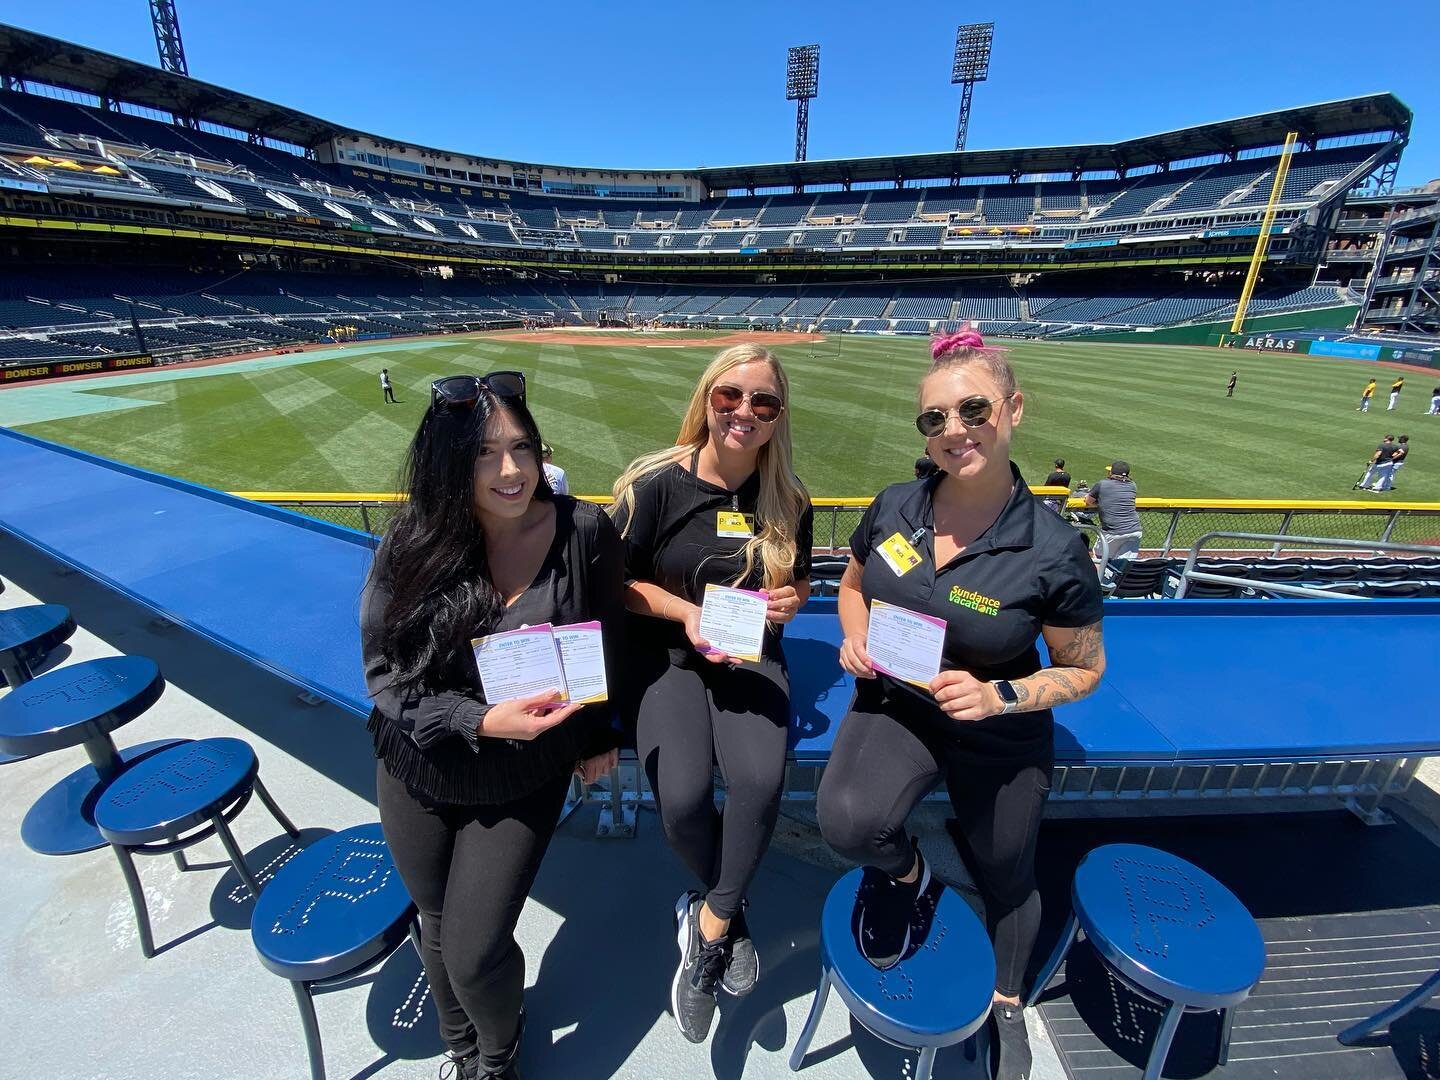 The Mint Team enjoyed an absolutely GORGEOUS day at Pnc Park!! 🌟 Come visit us this homestand to win club seat tickets or an official mlb pirates jersey! Go Bucs! ⚾️ @pnc_park @pncparkevents @pittsburghpirates @mlb 

#mint #mintteam #baseball #mlb #